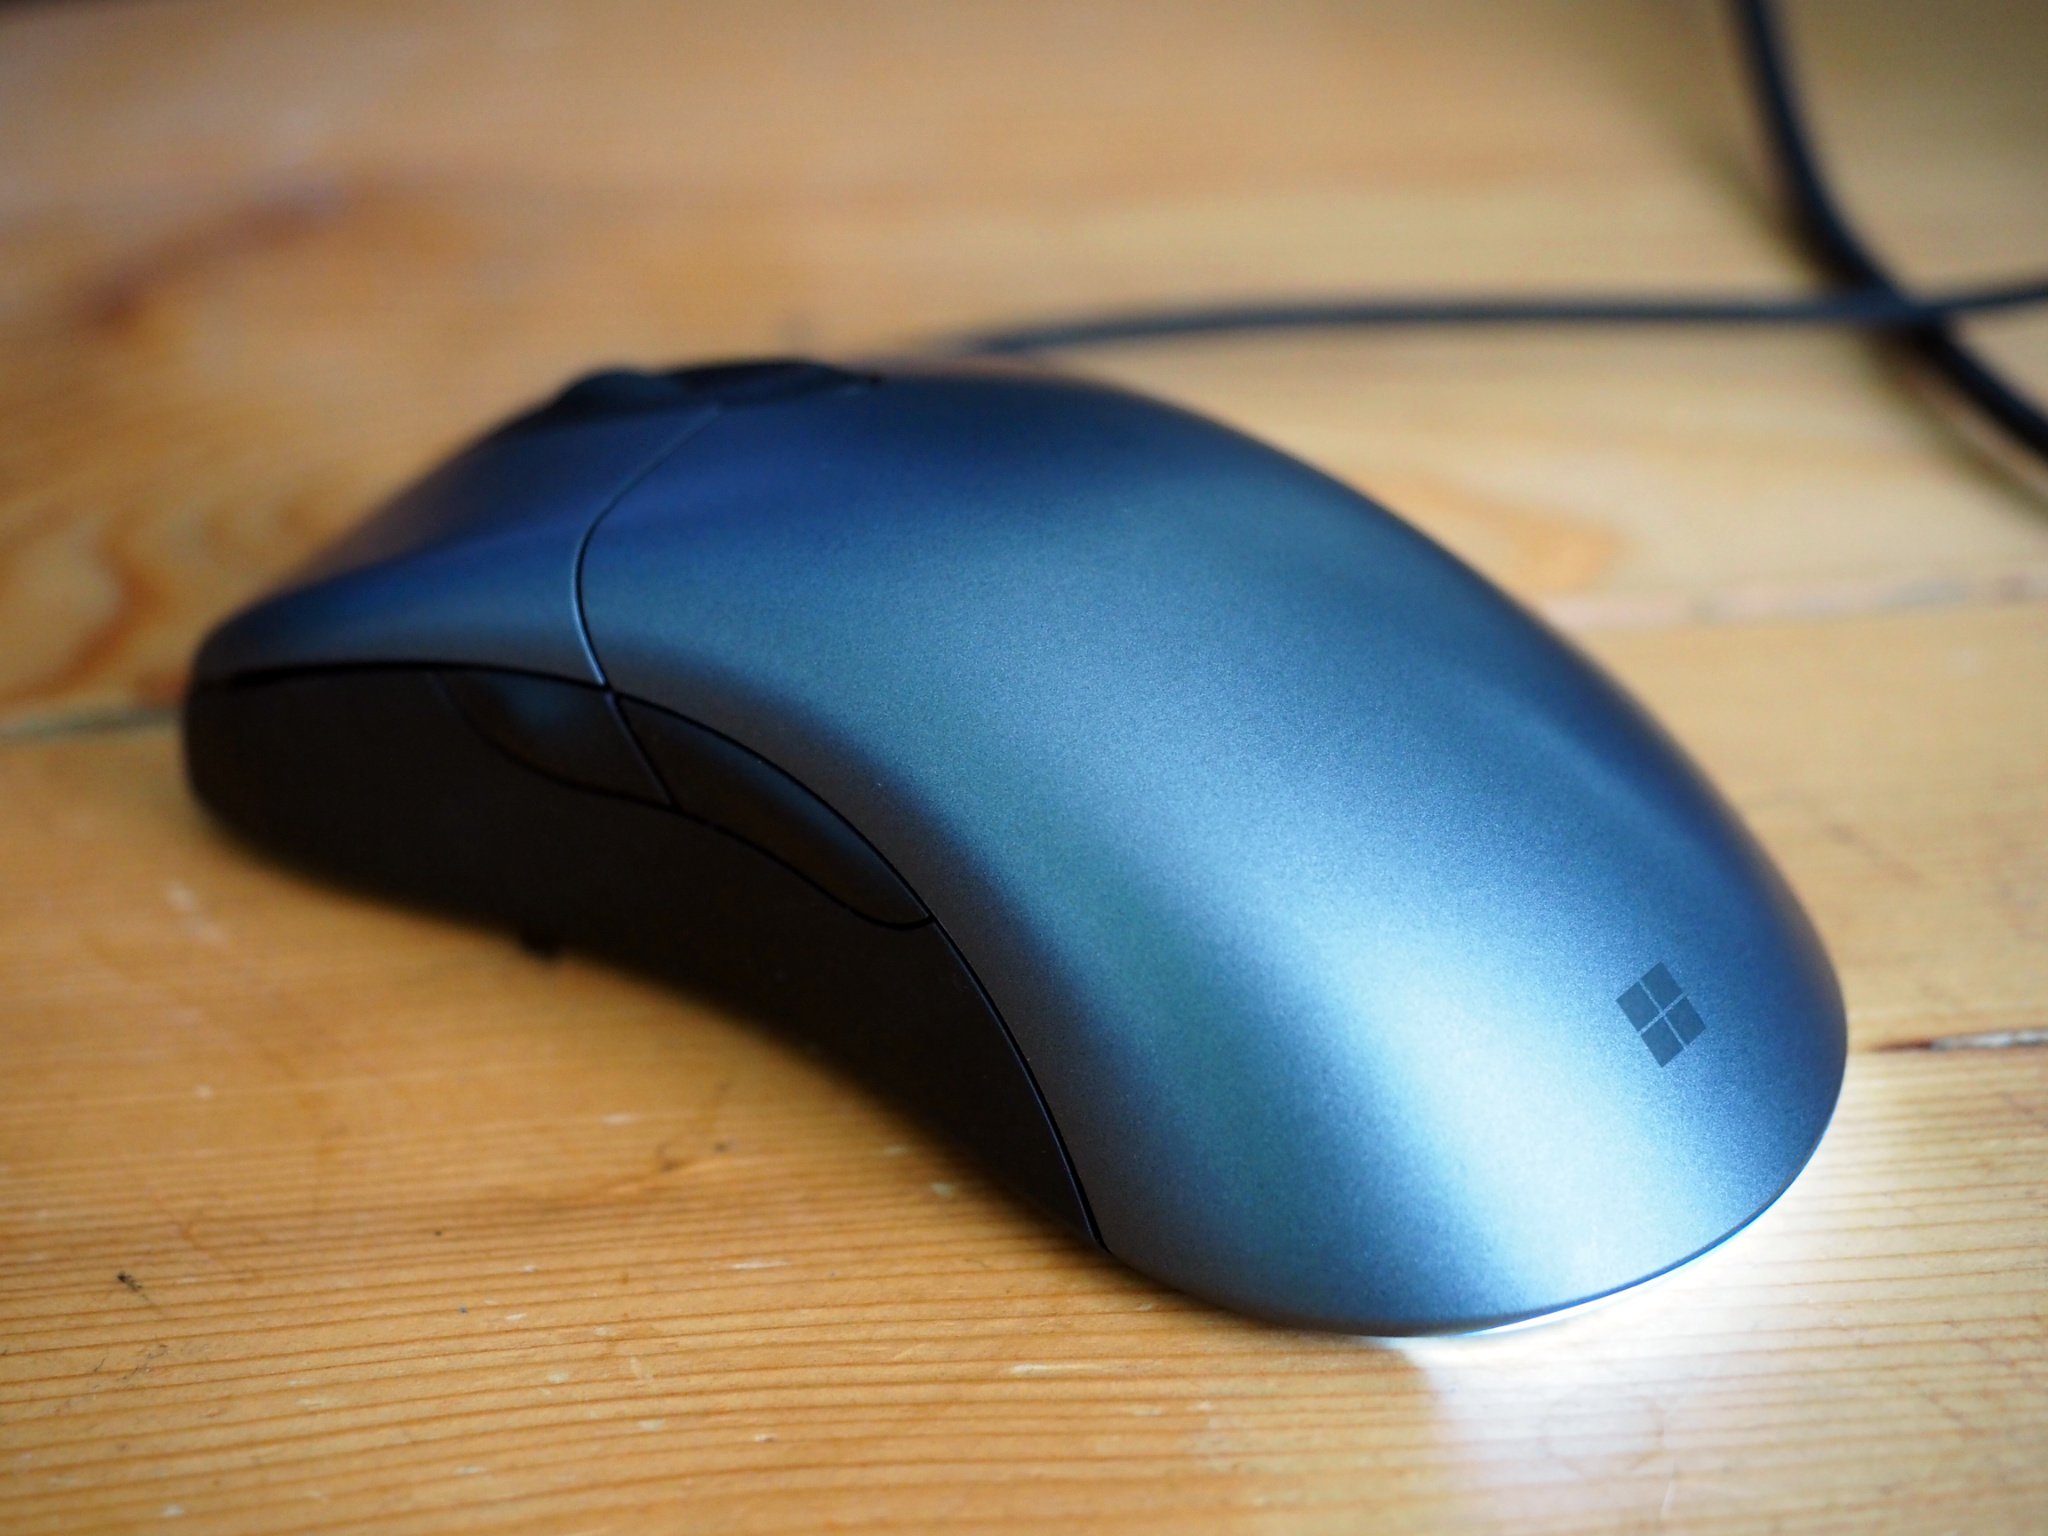 Microsoft devices design director talks improving on the IntelliMouse legacy